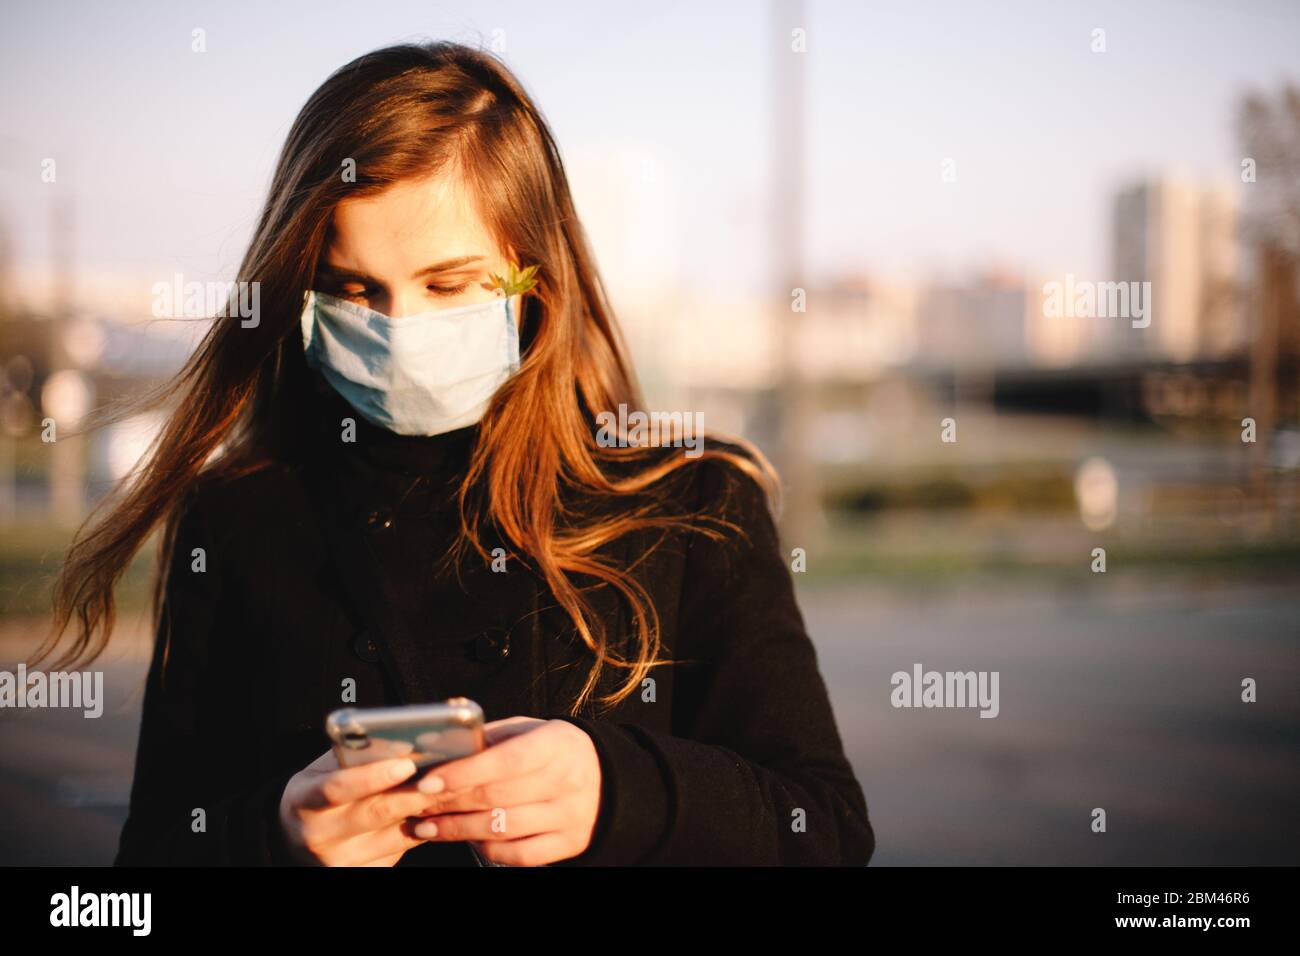 Portrait of sad teenage girl using smart phone wearing protective face medical mask standing outdoors on city street Stock Photo